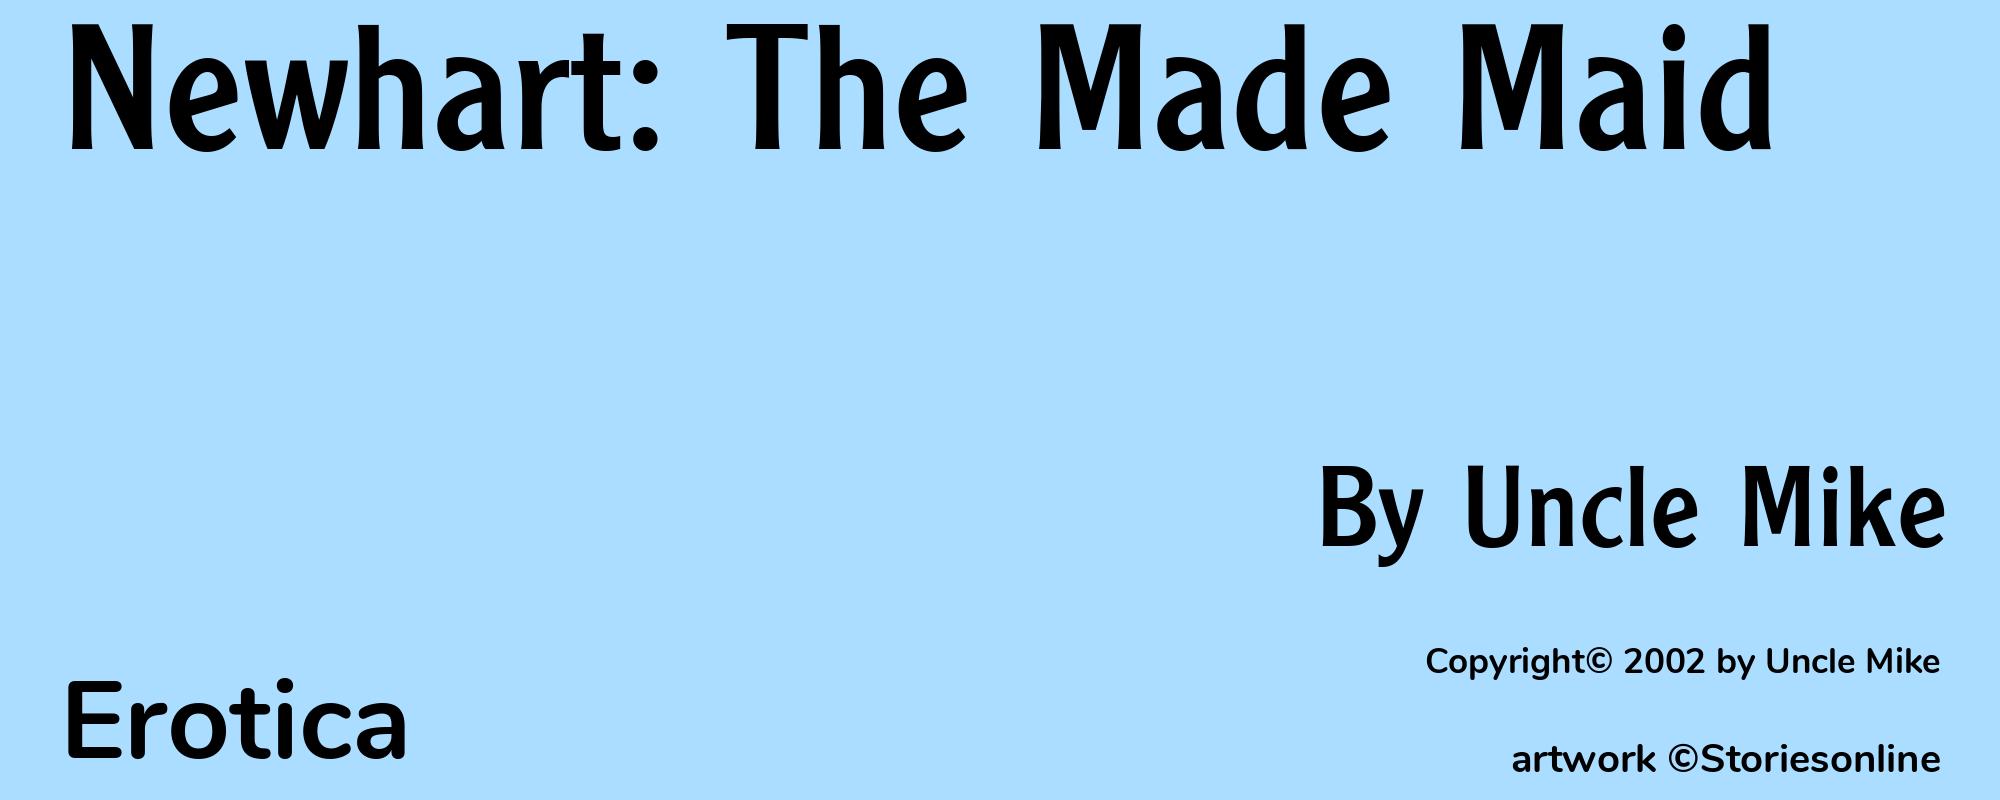 Newhart: The Made Maid - Cover